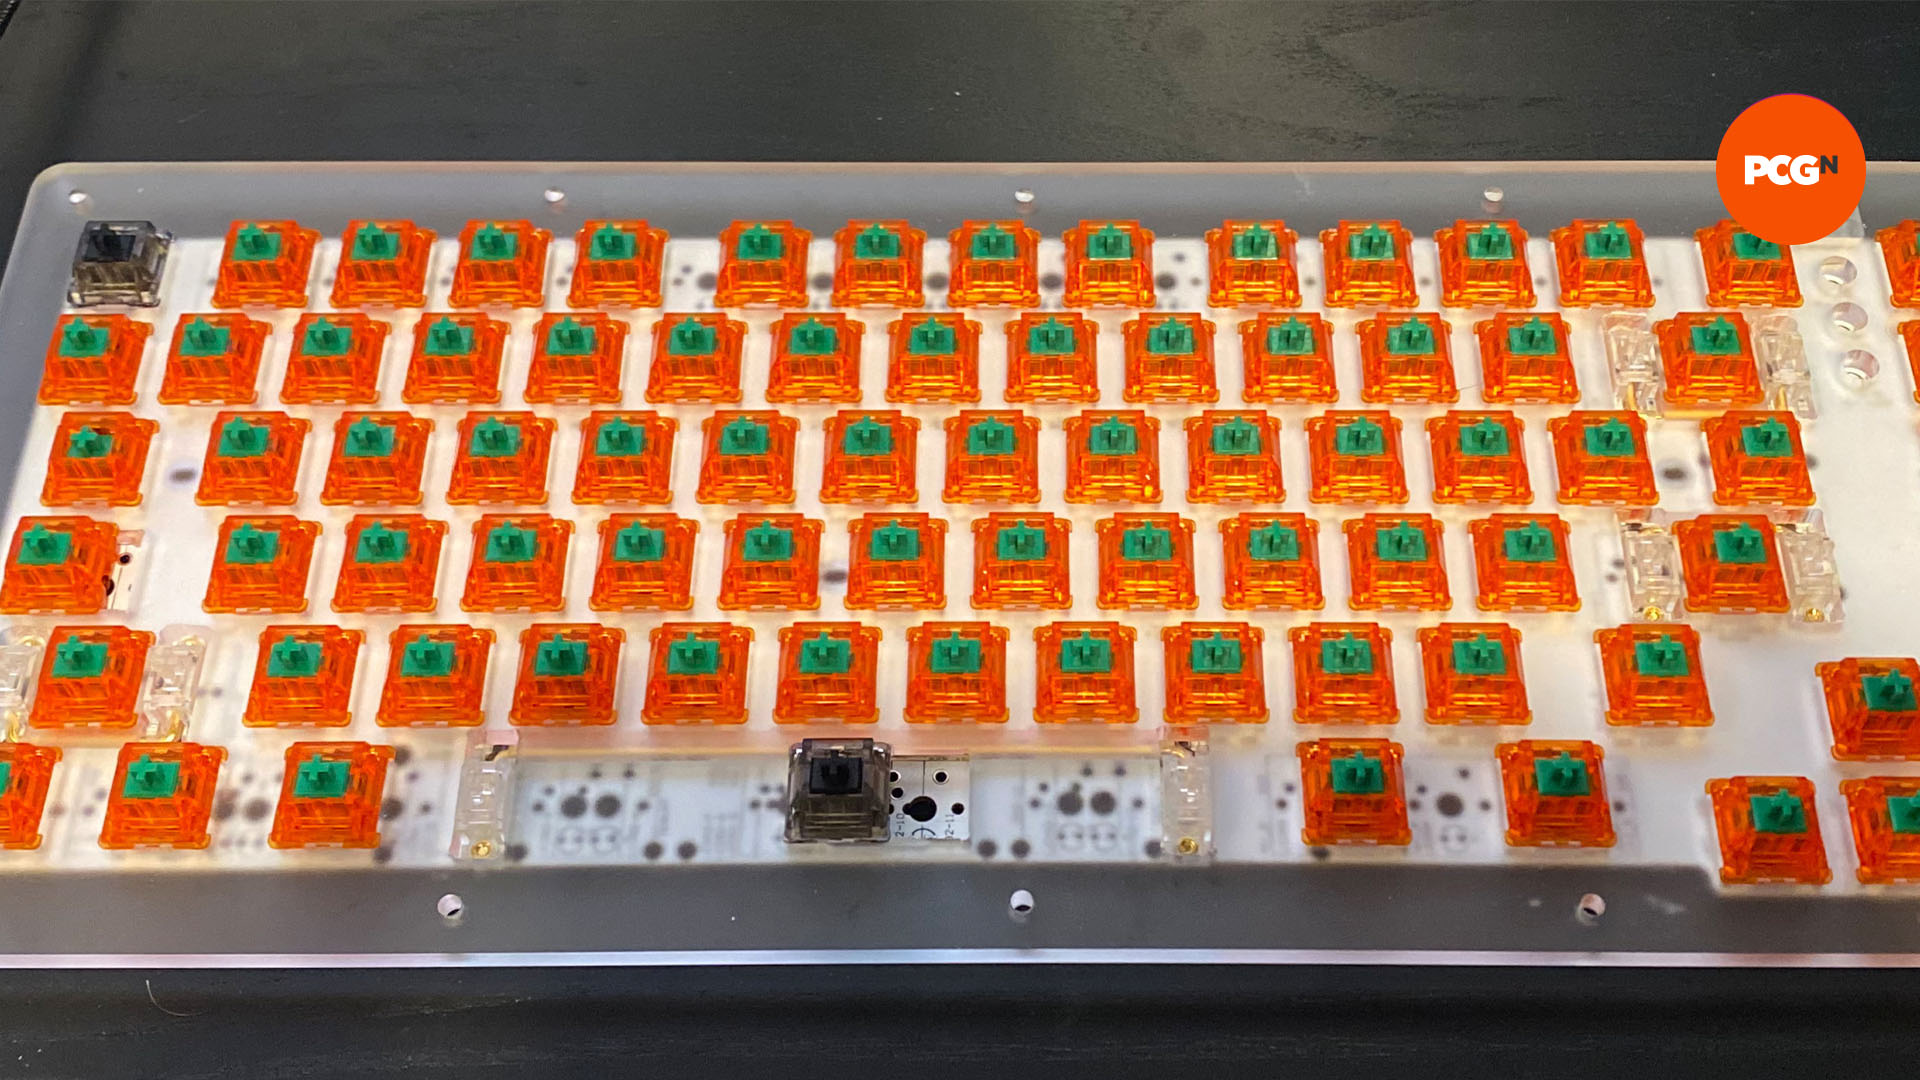 How to make a custom keyboard: Mount switches on the plate and PCB